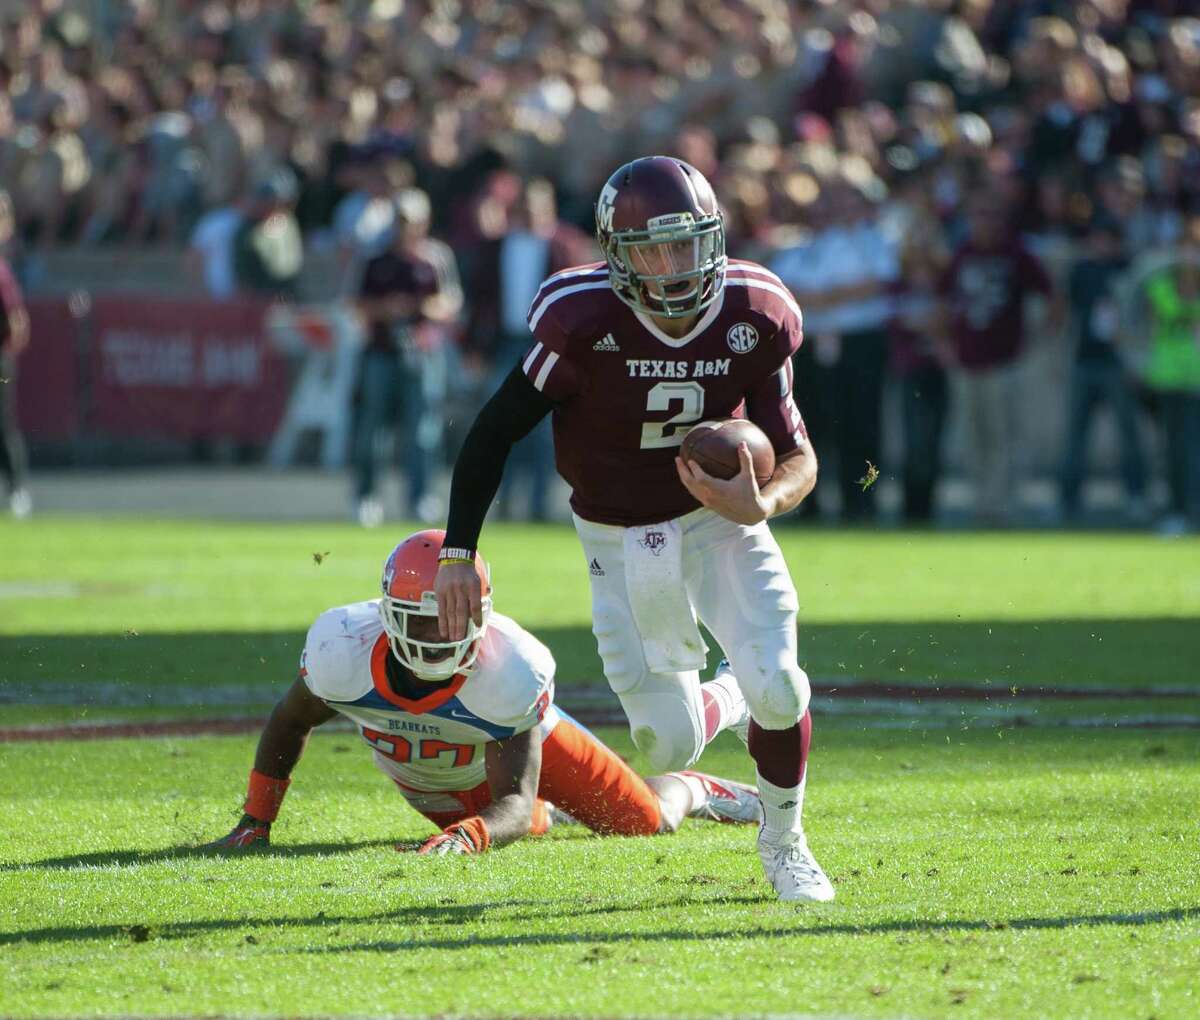 Texas A&M's Johnny Manziel (2) leaves Sam Houston State's Mike Littleton (27) behind on a run during the first quarter of an NCAA college football game, Saturday, Nov. 17, 2012, in College Station, Texas. (AP Photo/Dave Einsel)